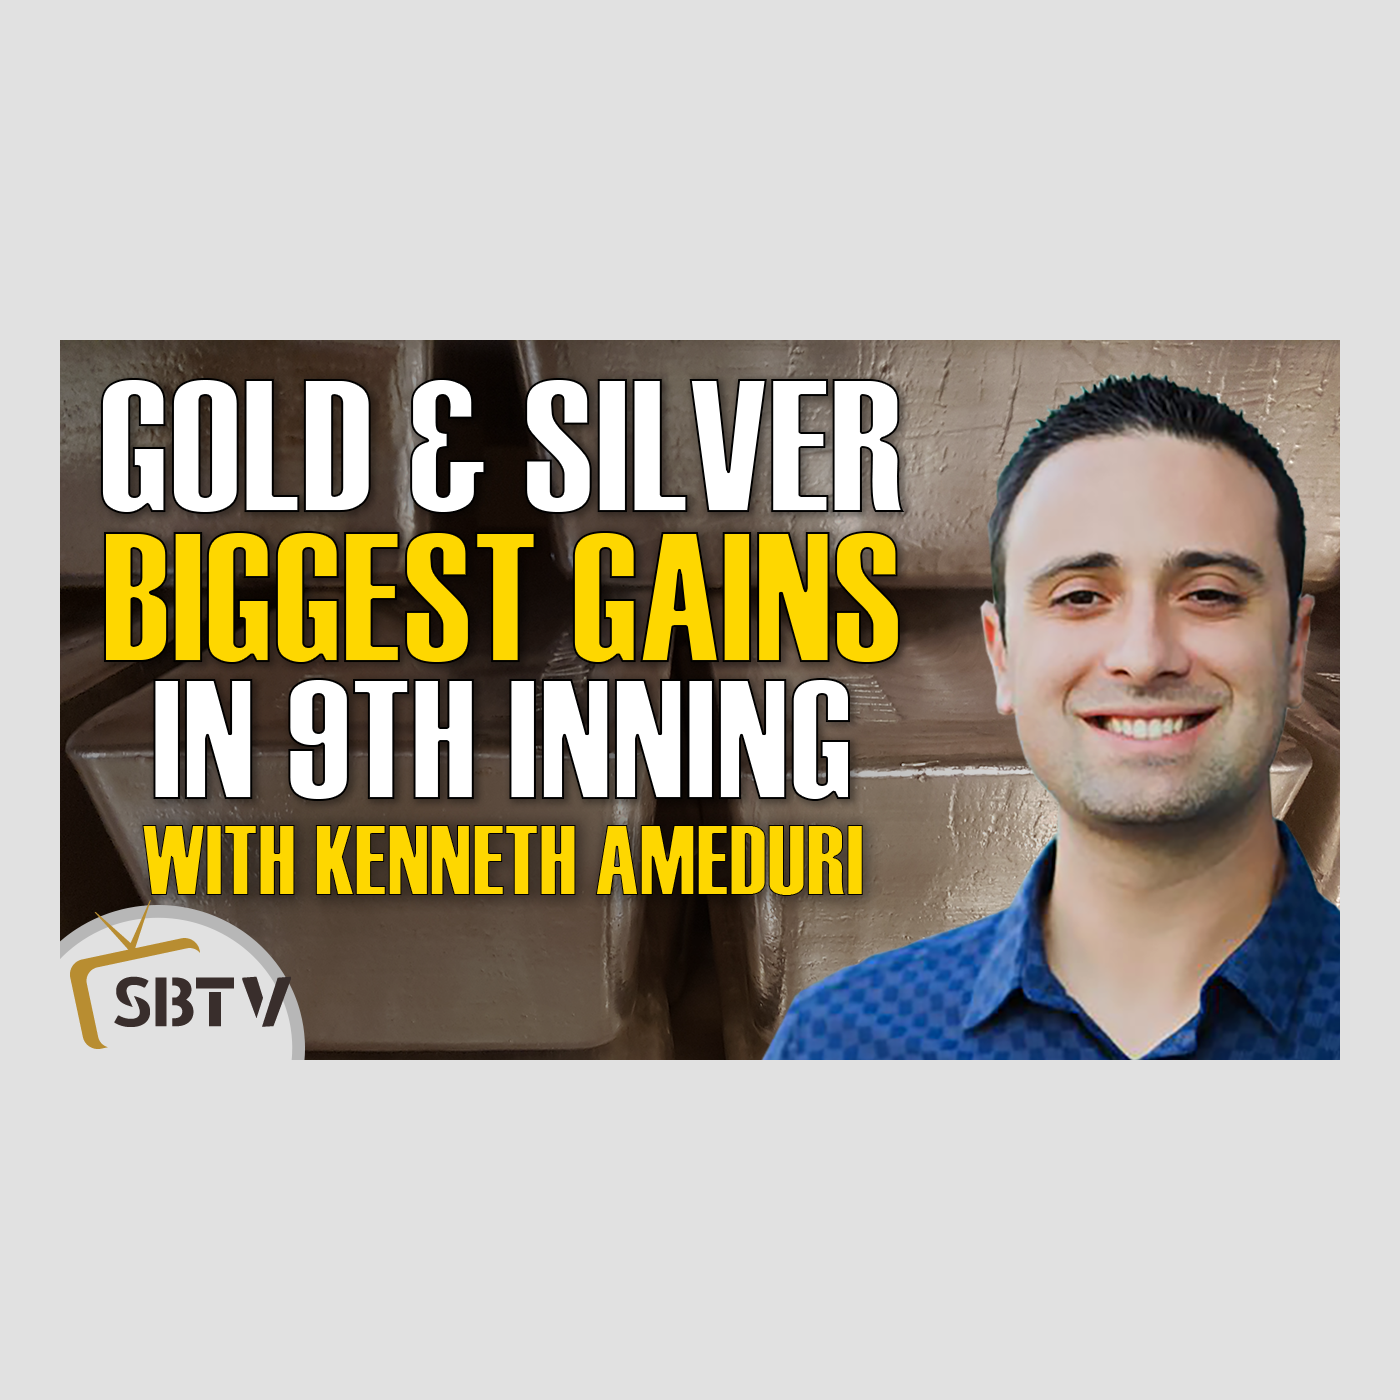 116 Kenneth Ameduri - Biggest Gains In This Gold and Silver Bull Market Come In the 9th Inning